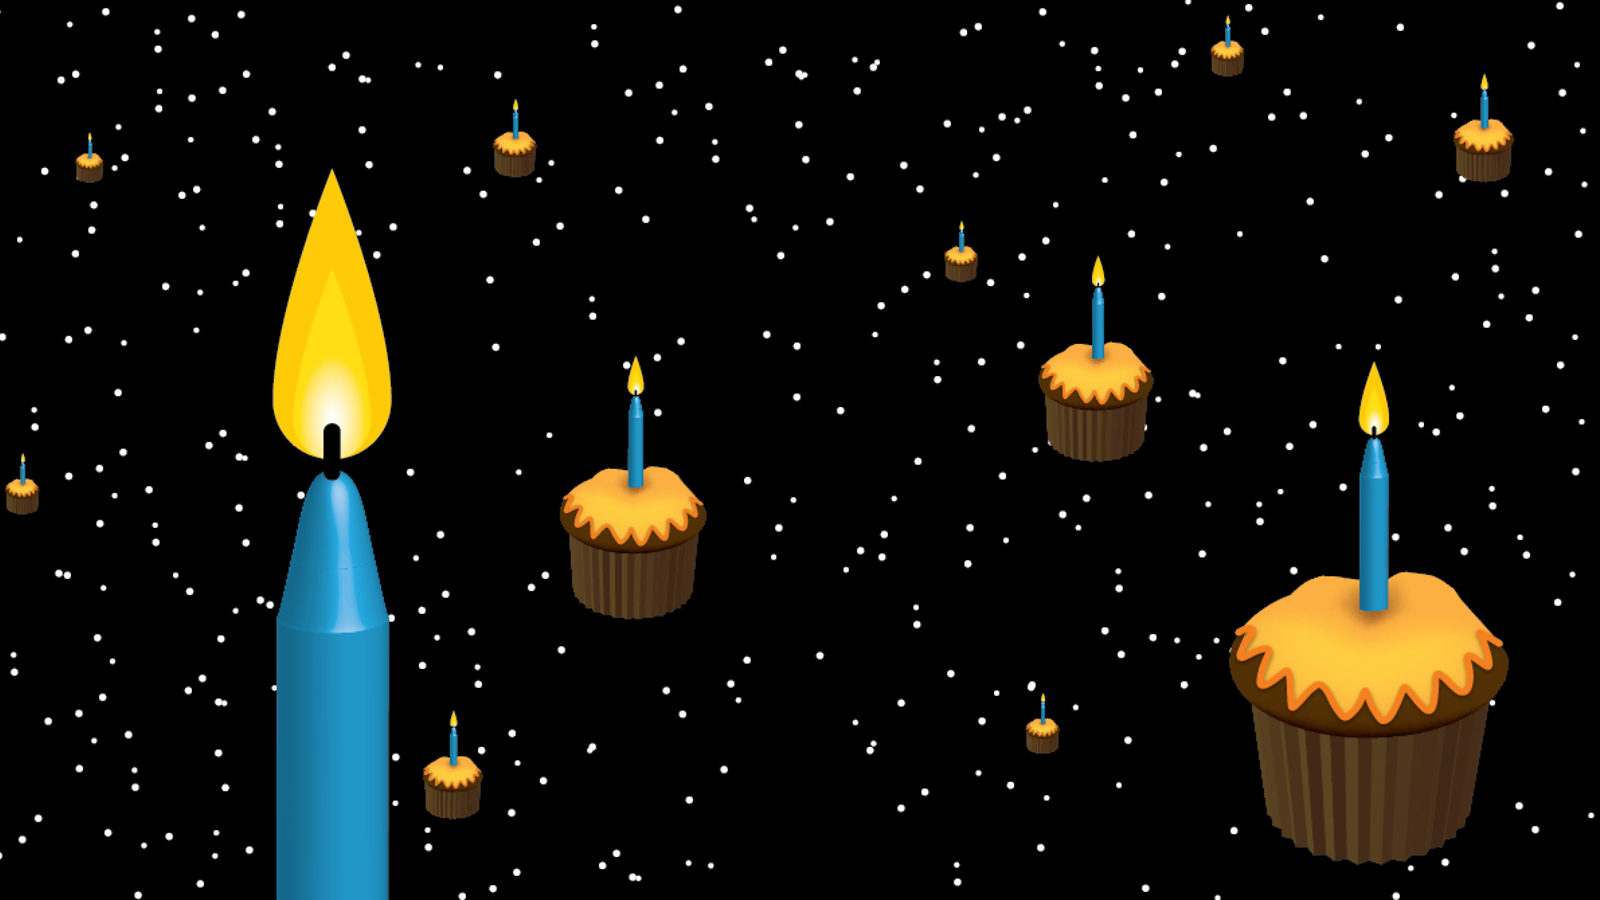 Illustration of cupcakes with candles in them in space